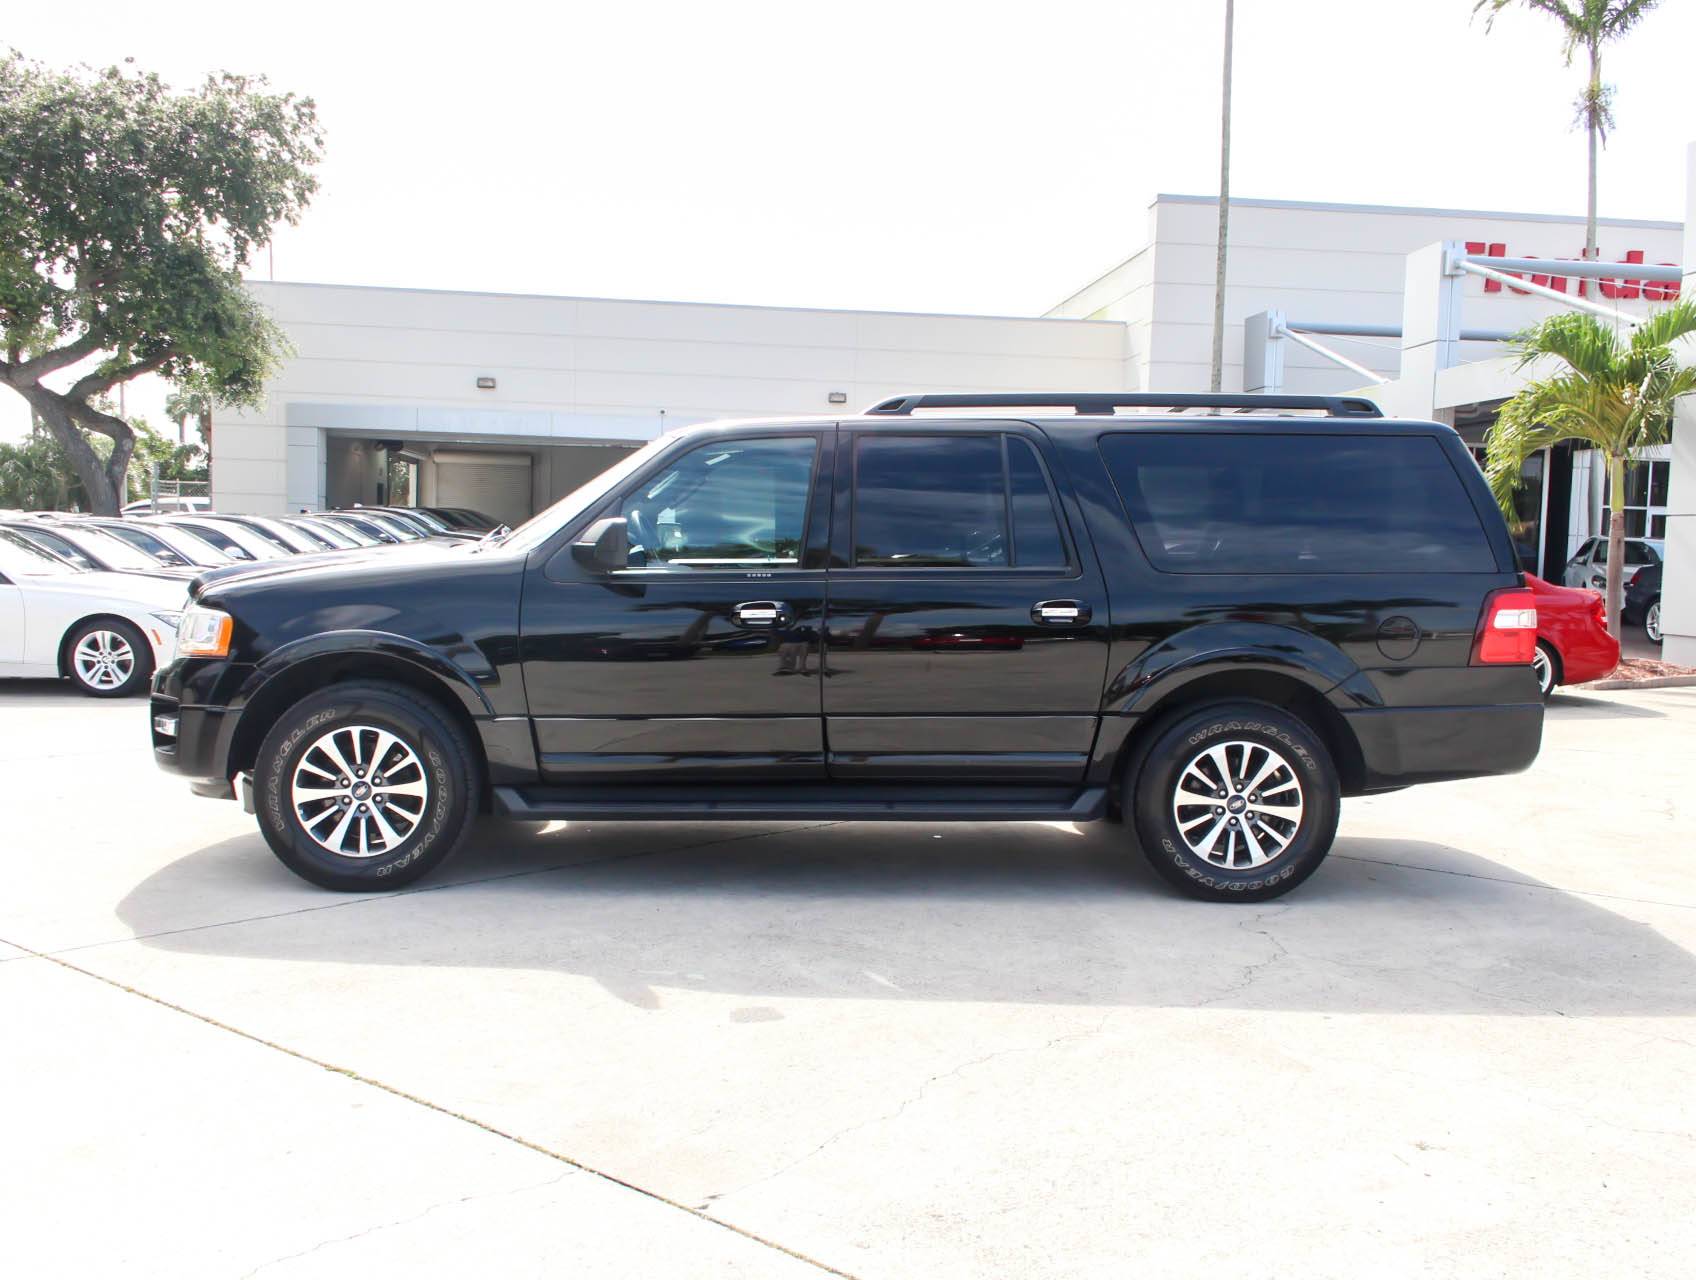 Florida Fine Cars - Used FORD EXPEDITION EL 2017 MARGATE Xlt Awd